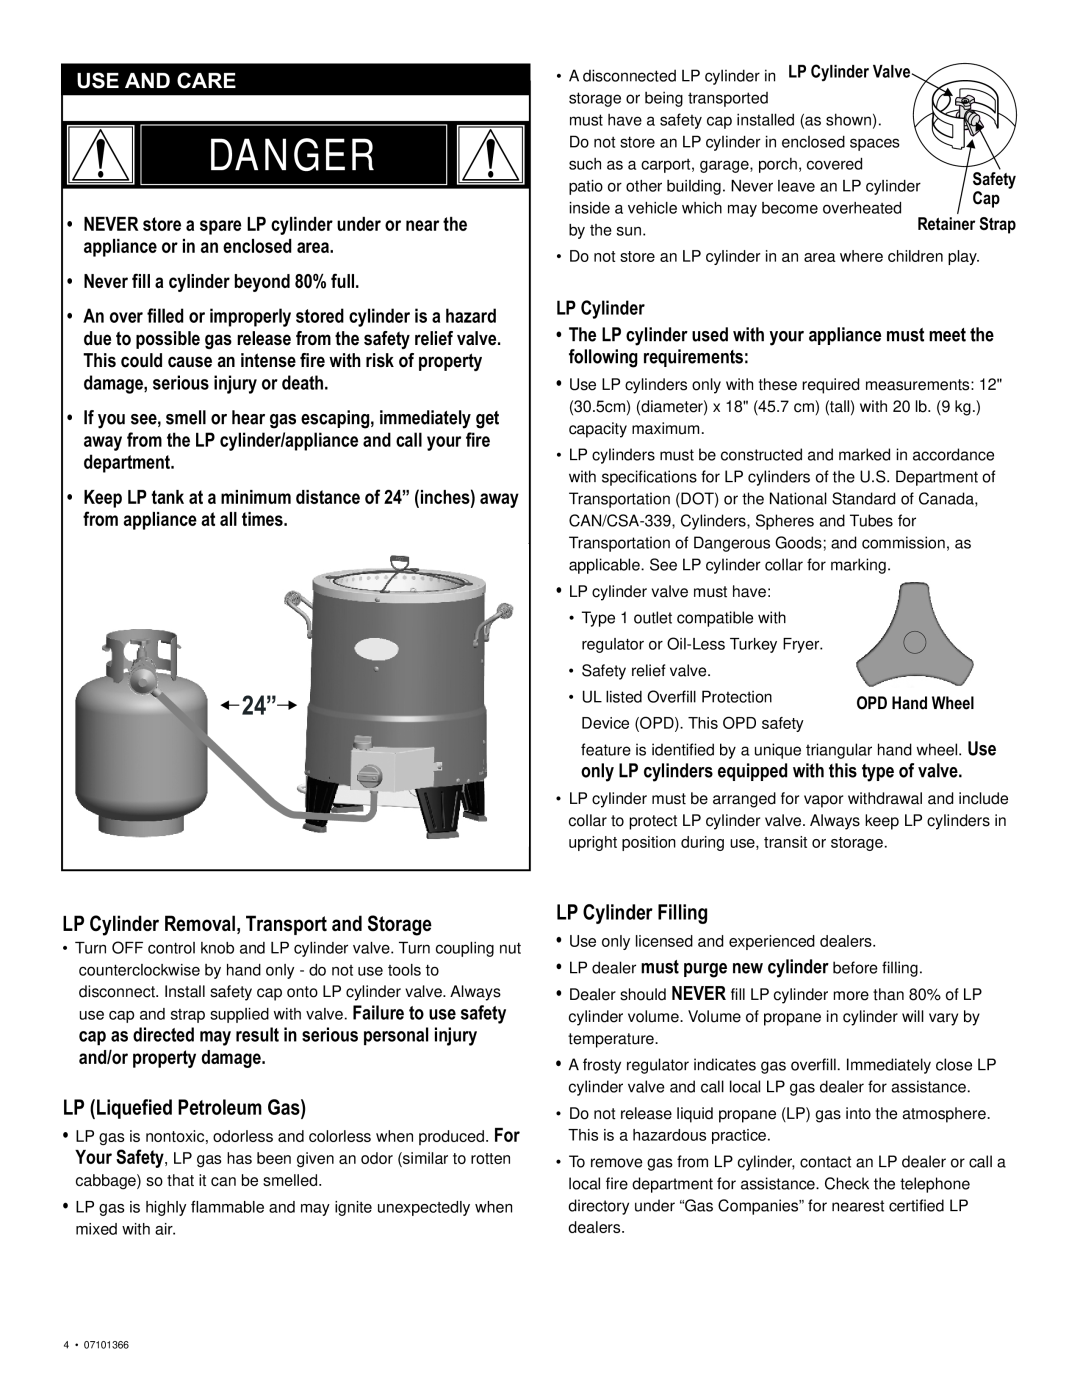 Char-Broil 7101366 manual Use And Care, Danger, Never fill a cylinder beyond 80% full, LP Cylinder 